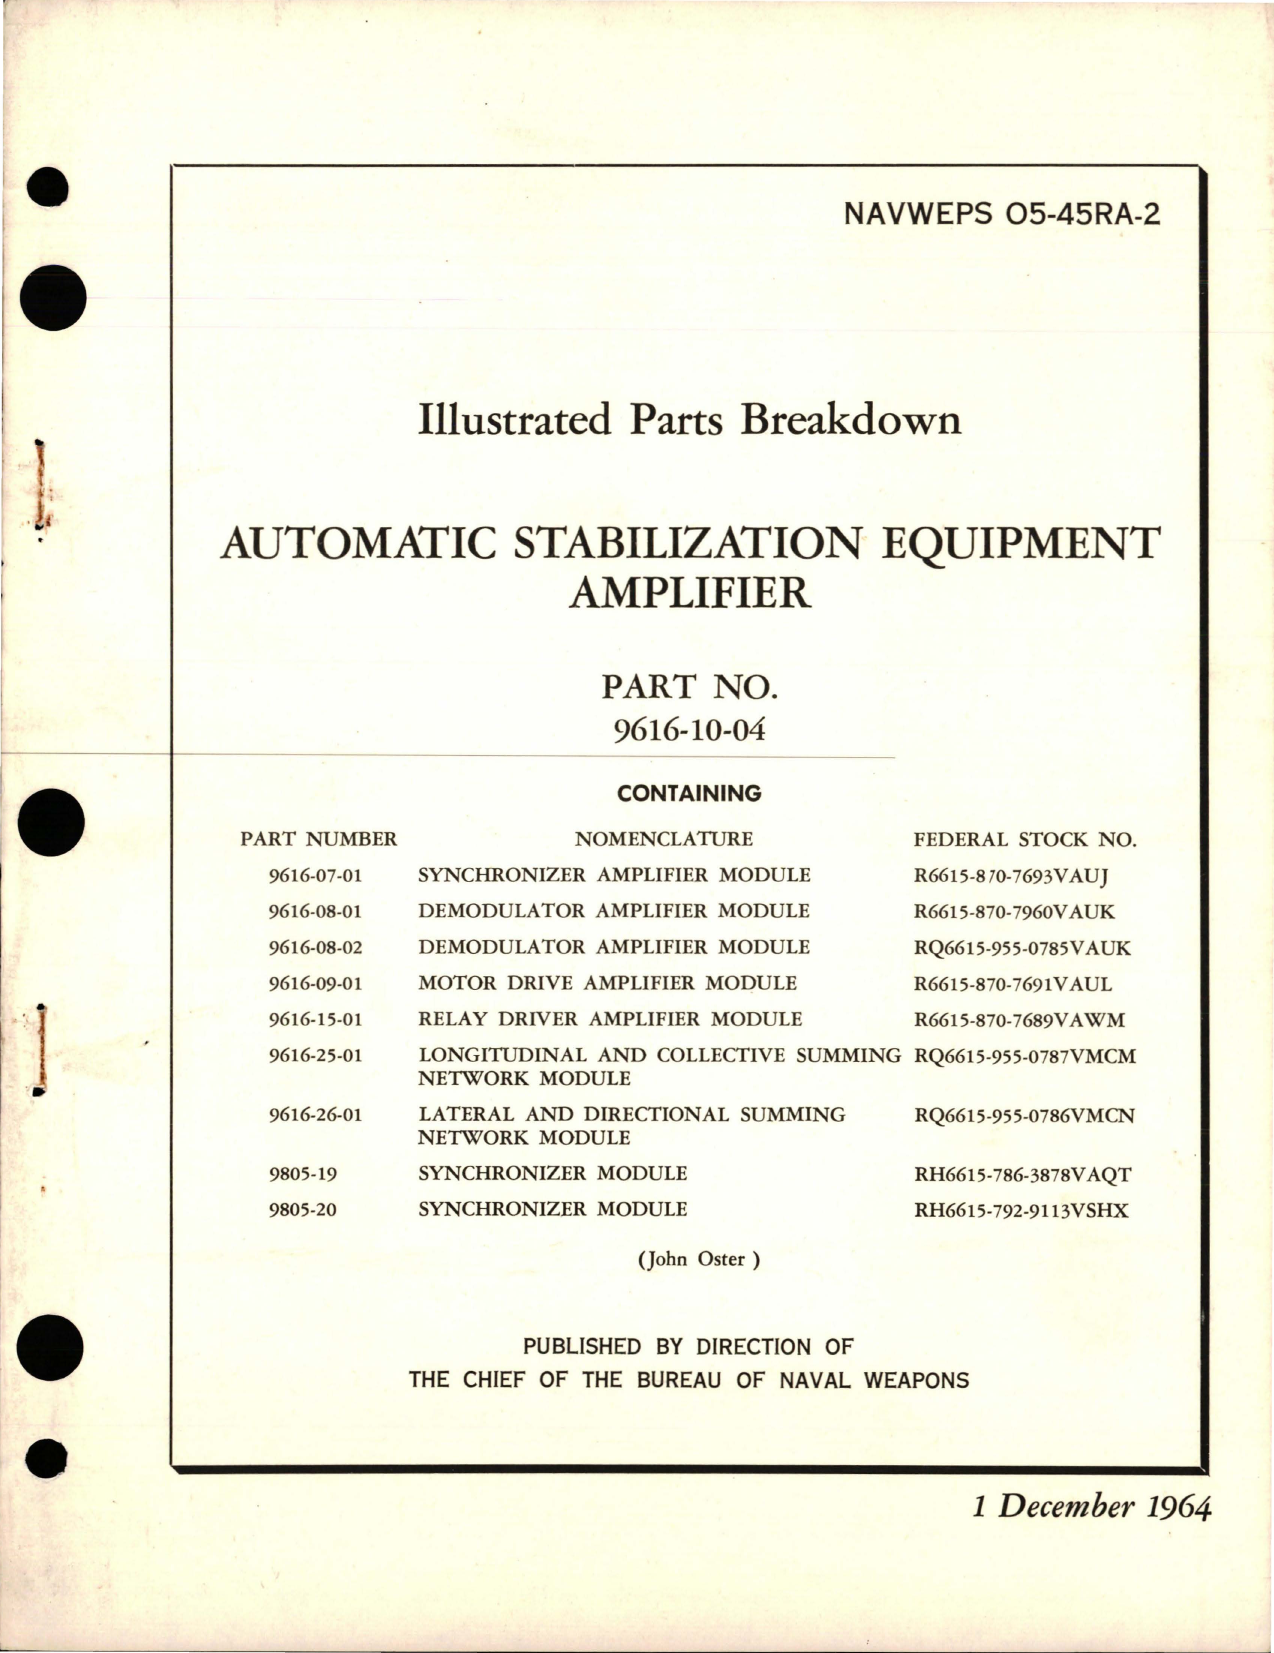 Sample page 1 from AirCorps Library document: Illustrated Parts Breakdown for Automatic Stabilization Equipment Amplifier - Part 9616-10-04 